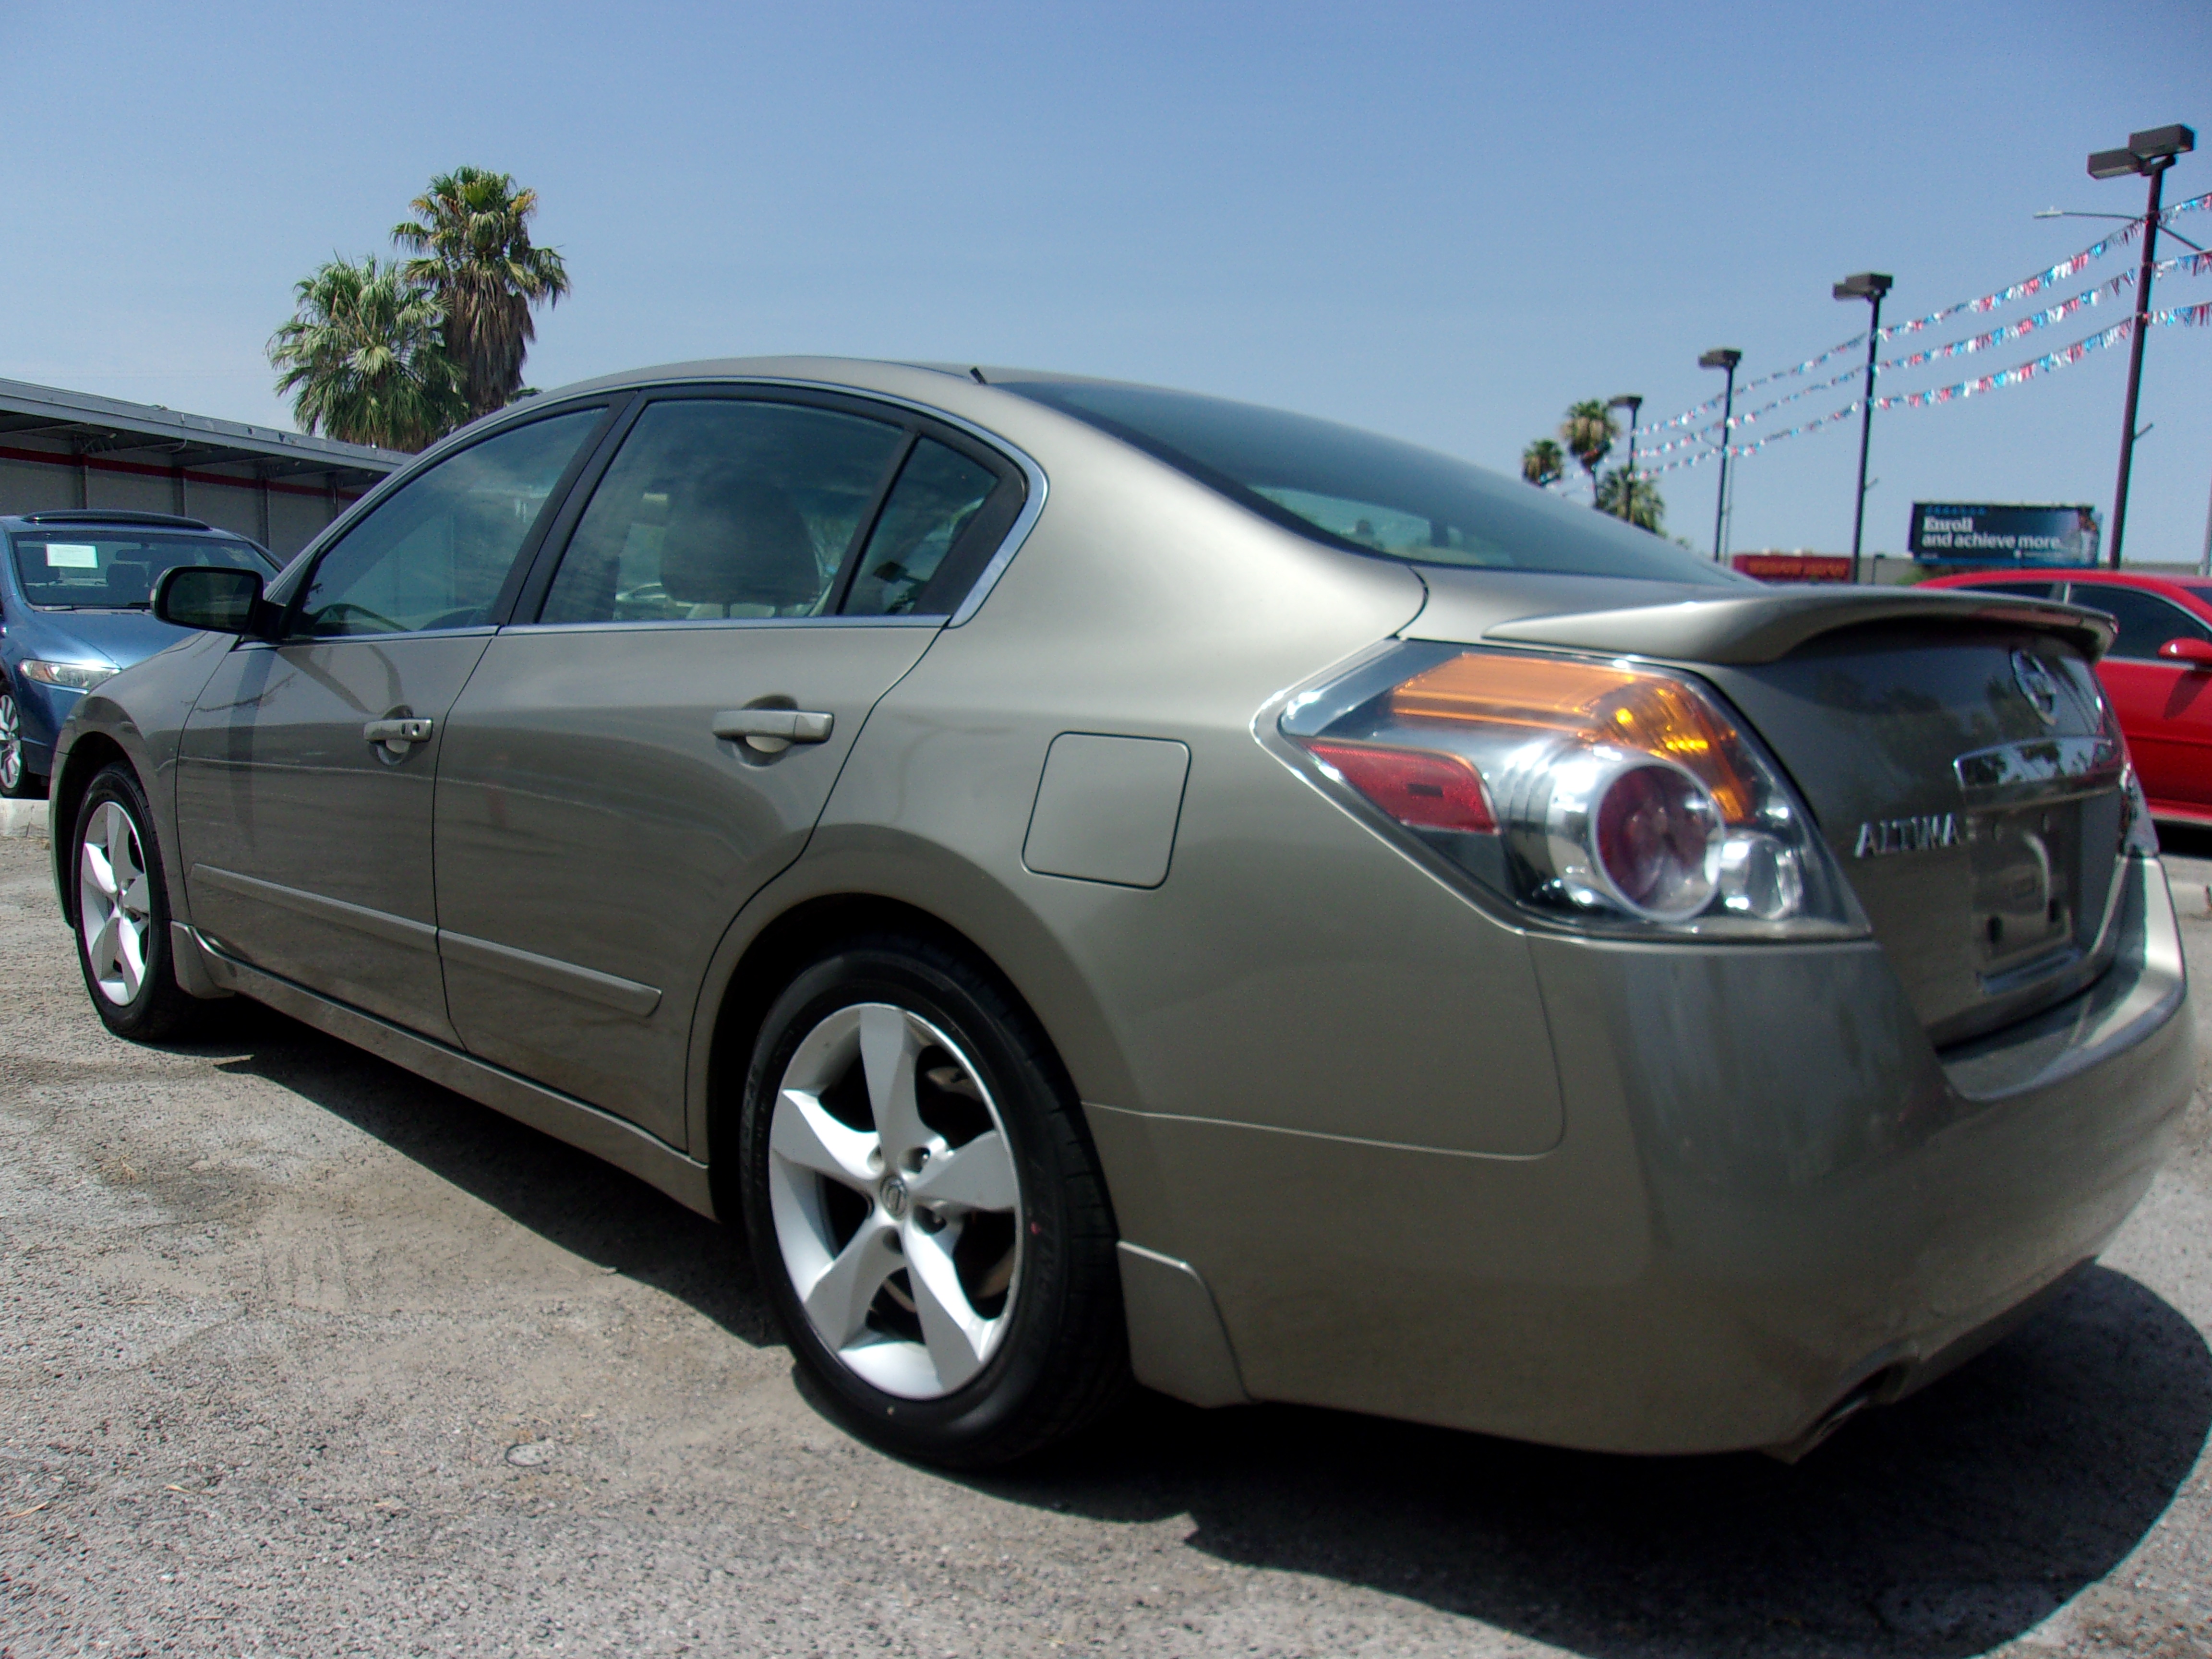 PreOwned 2007 NISSAN ALTIMA 4dr Car in Tucson S7584 Tucson Used Car